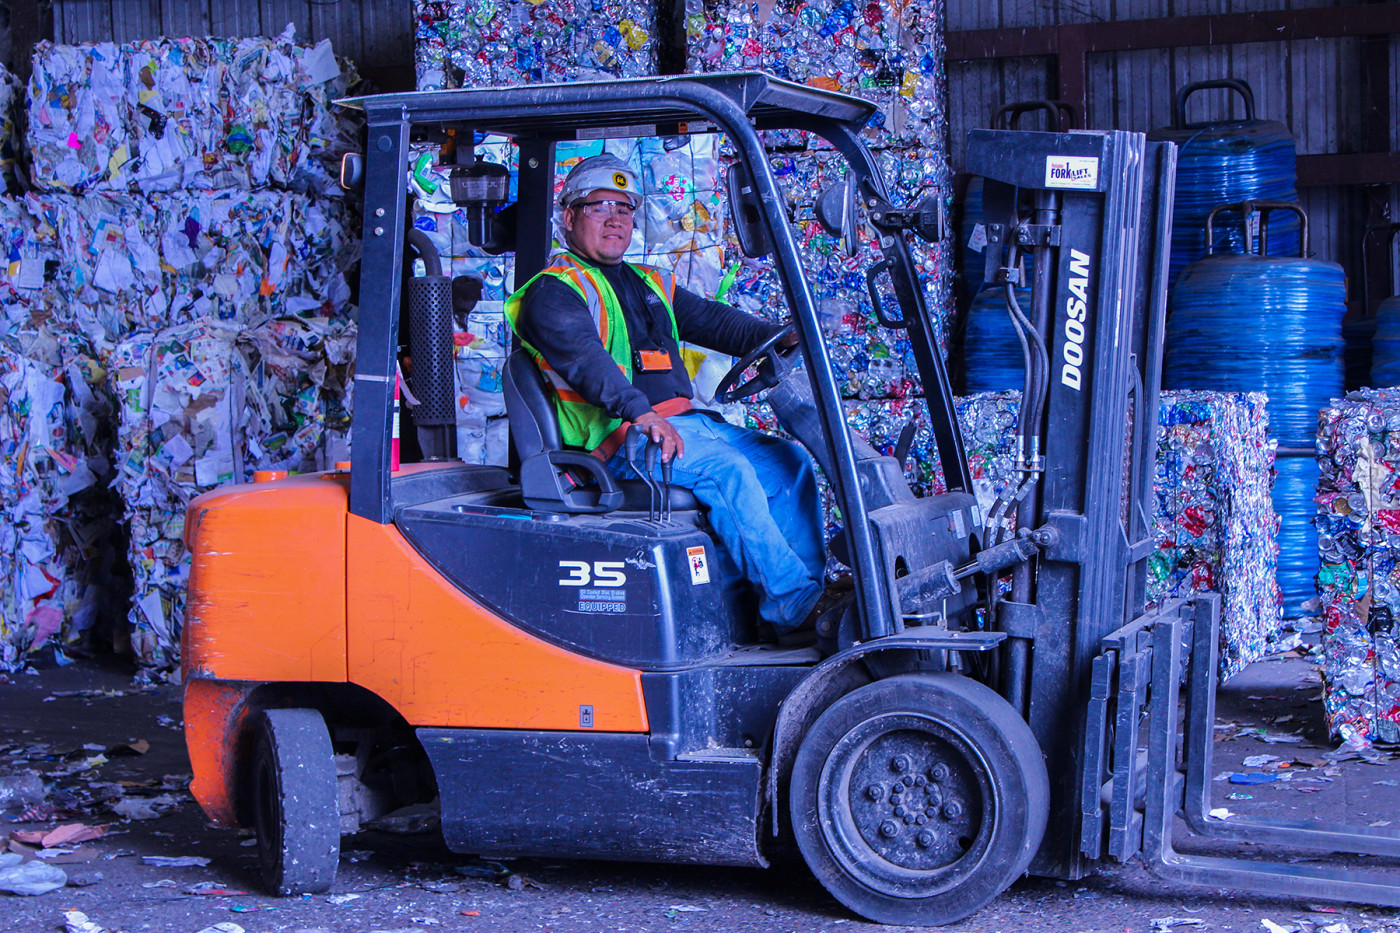 doosan forklift at a recycle center